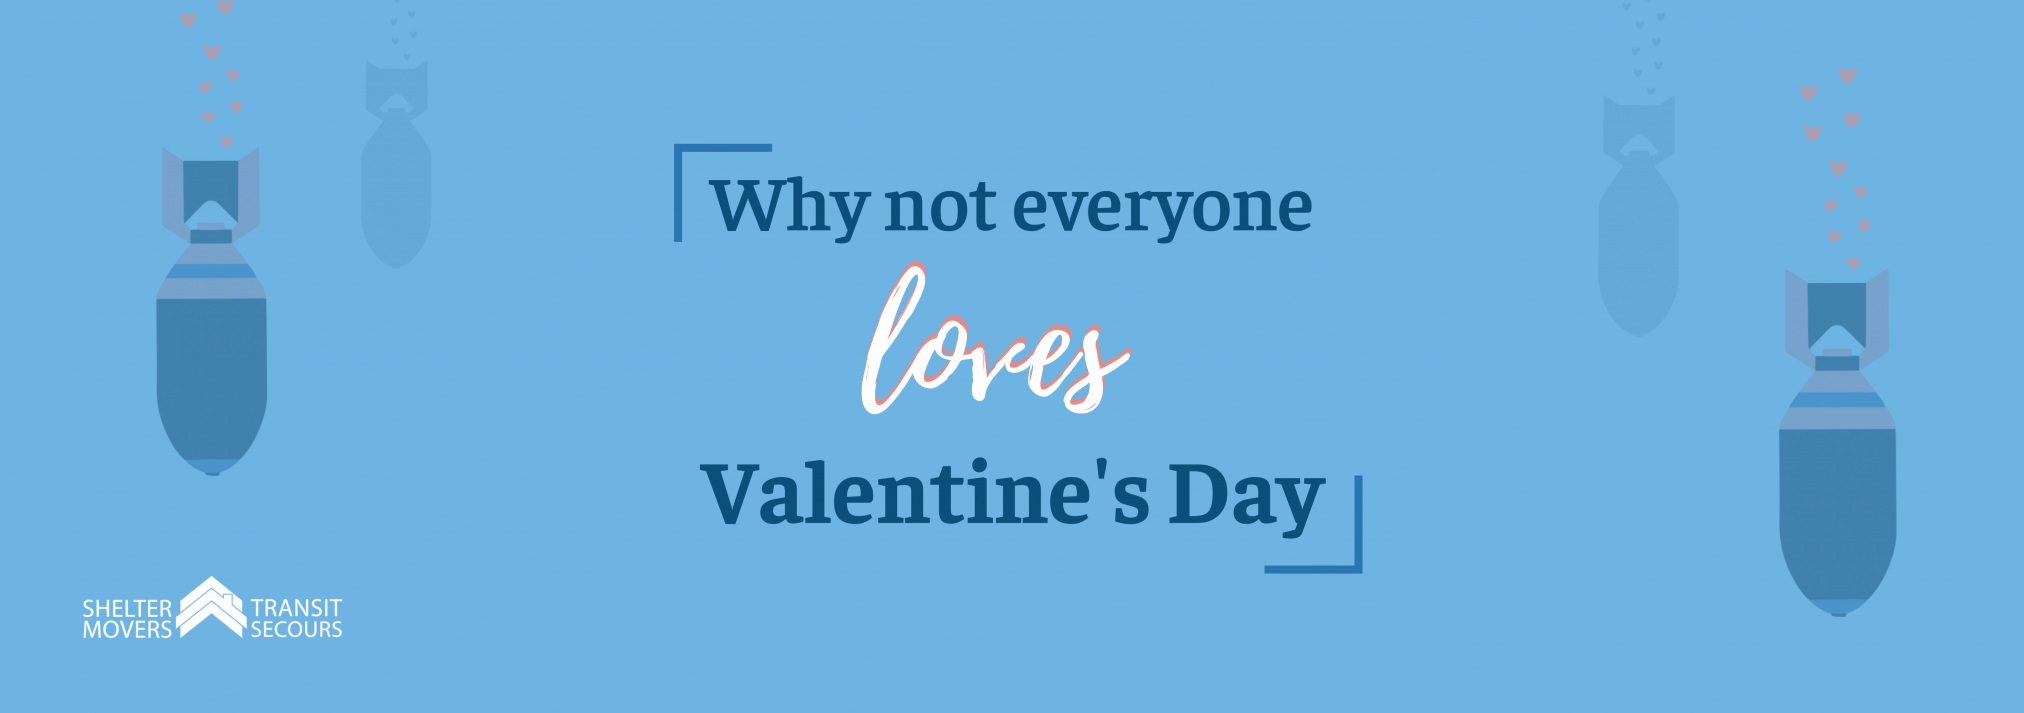 Why not everyone loves Valentine's Day